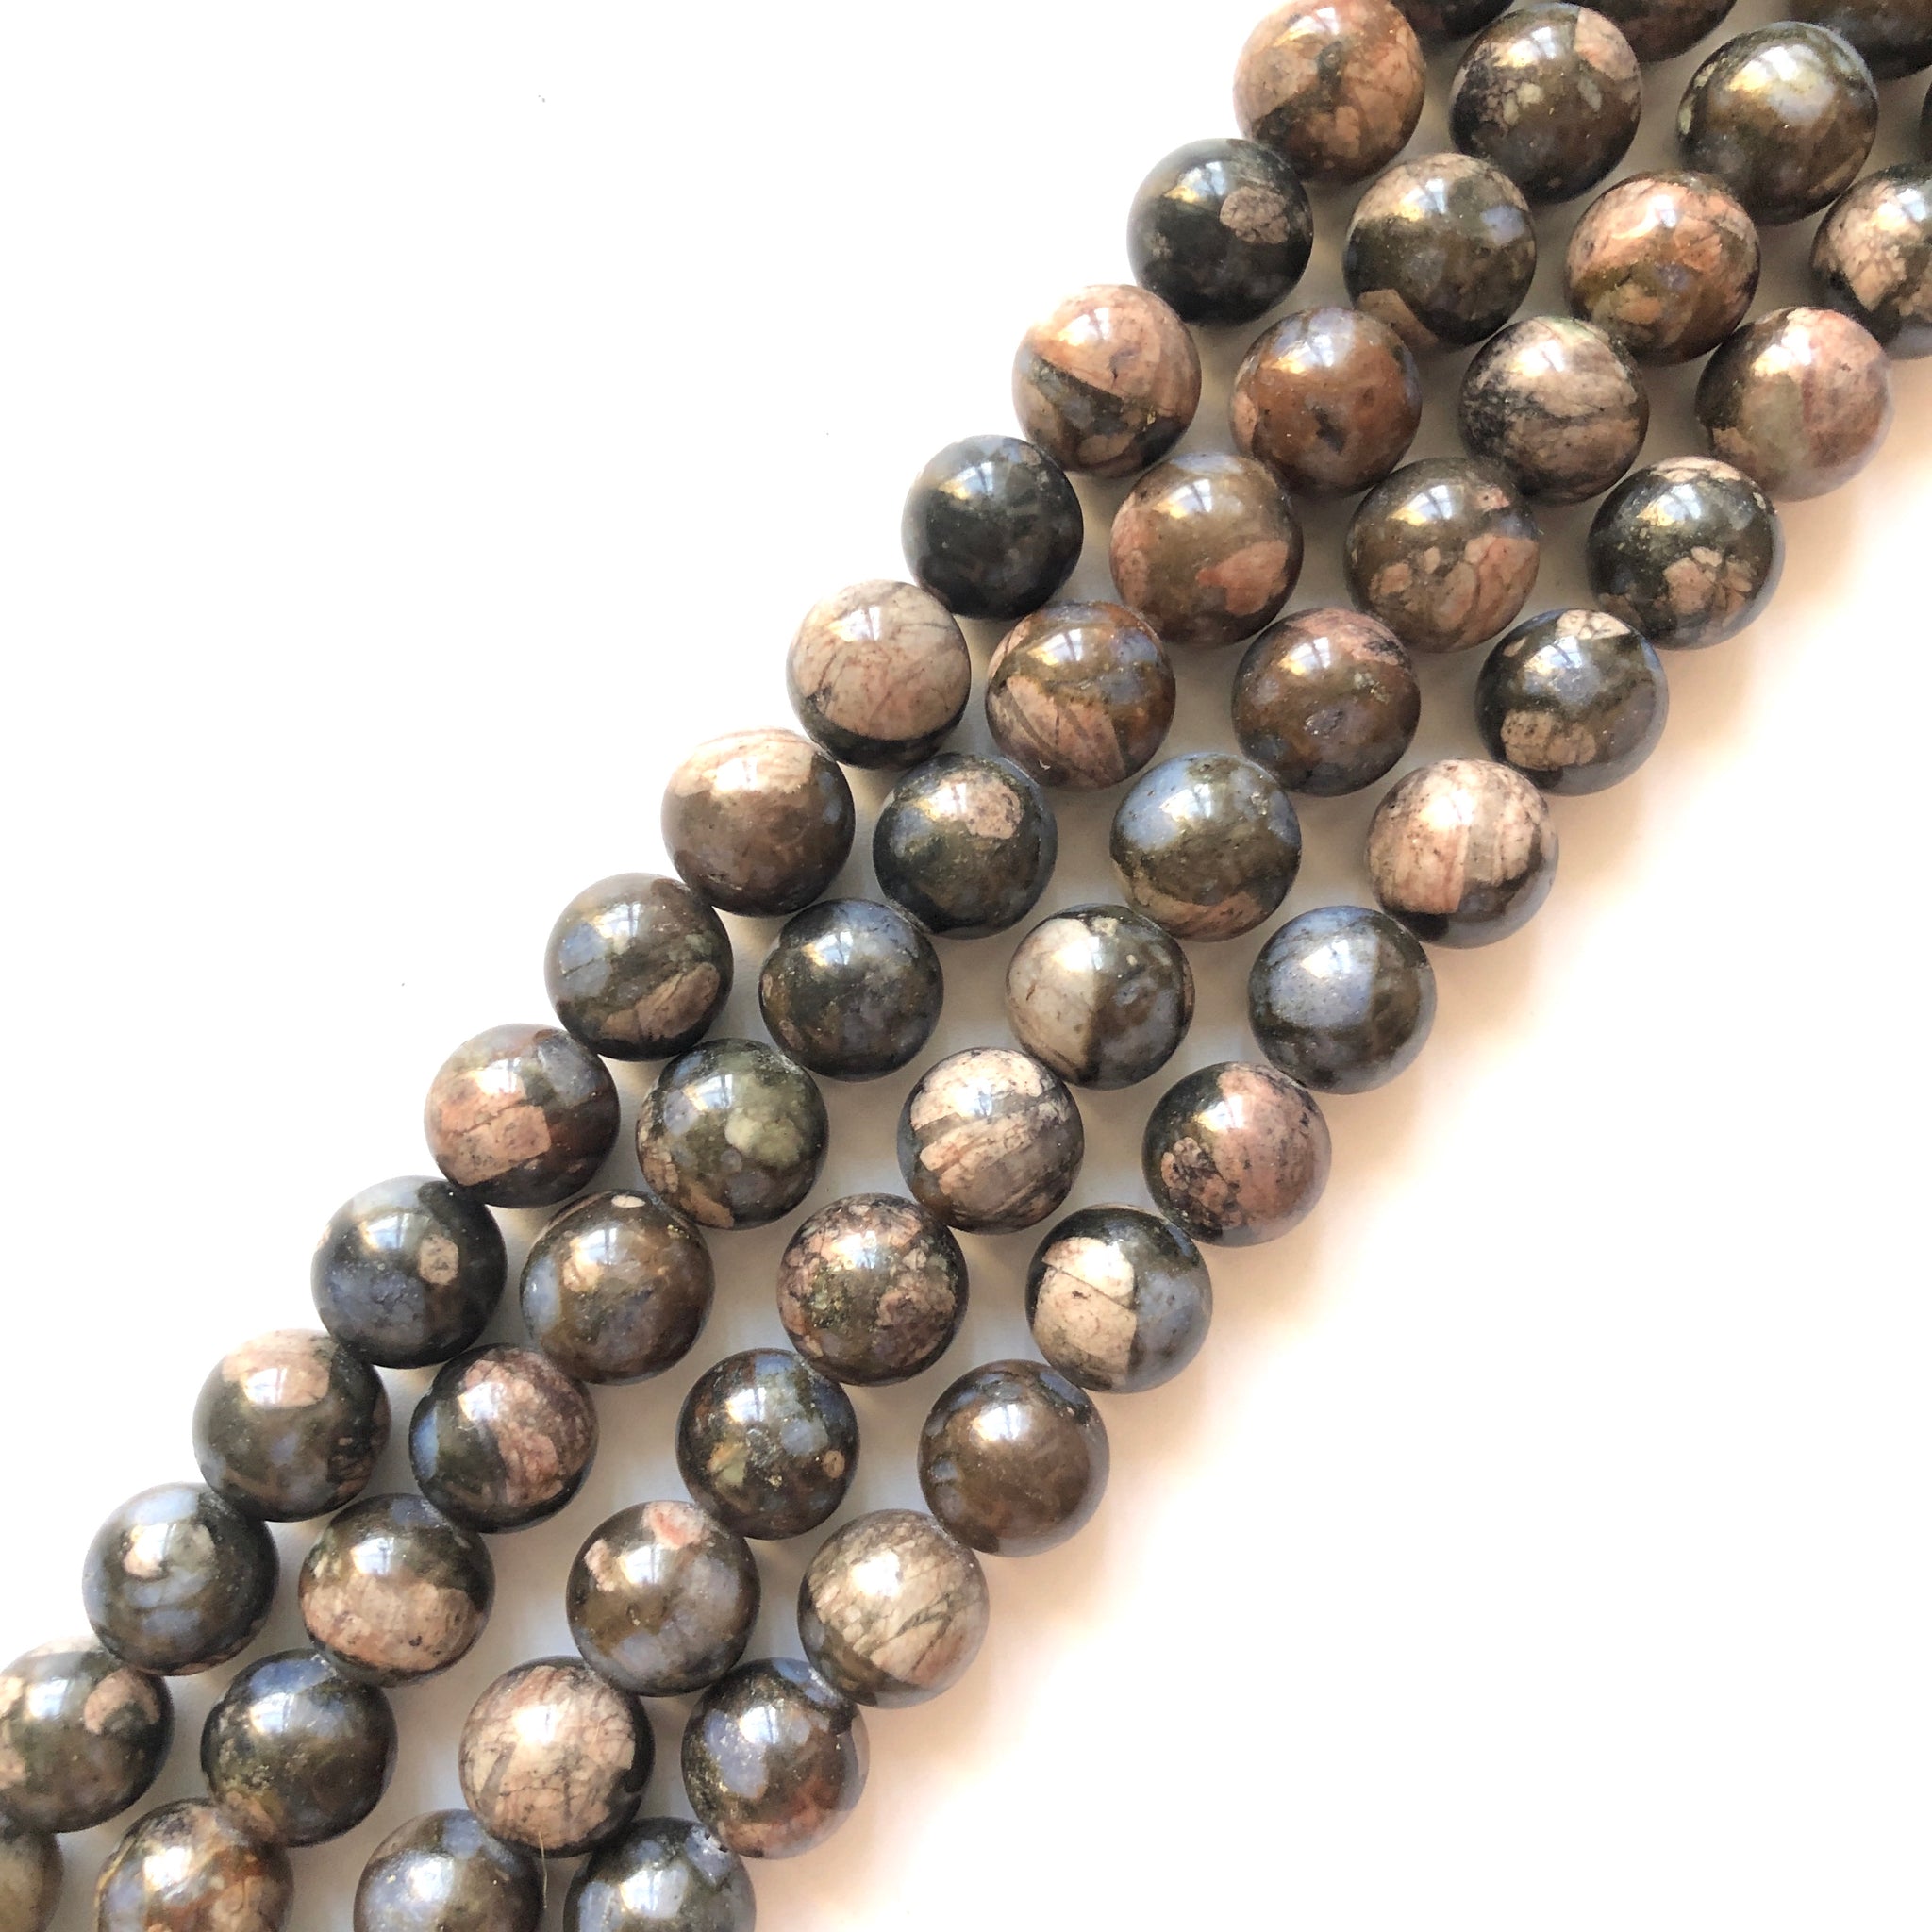 2 Strands/lot 10mm Glaucophane Stone Round Beads | Stone Beads | Charms ...